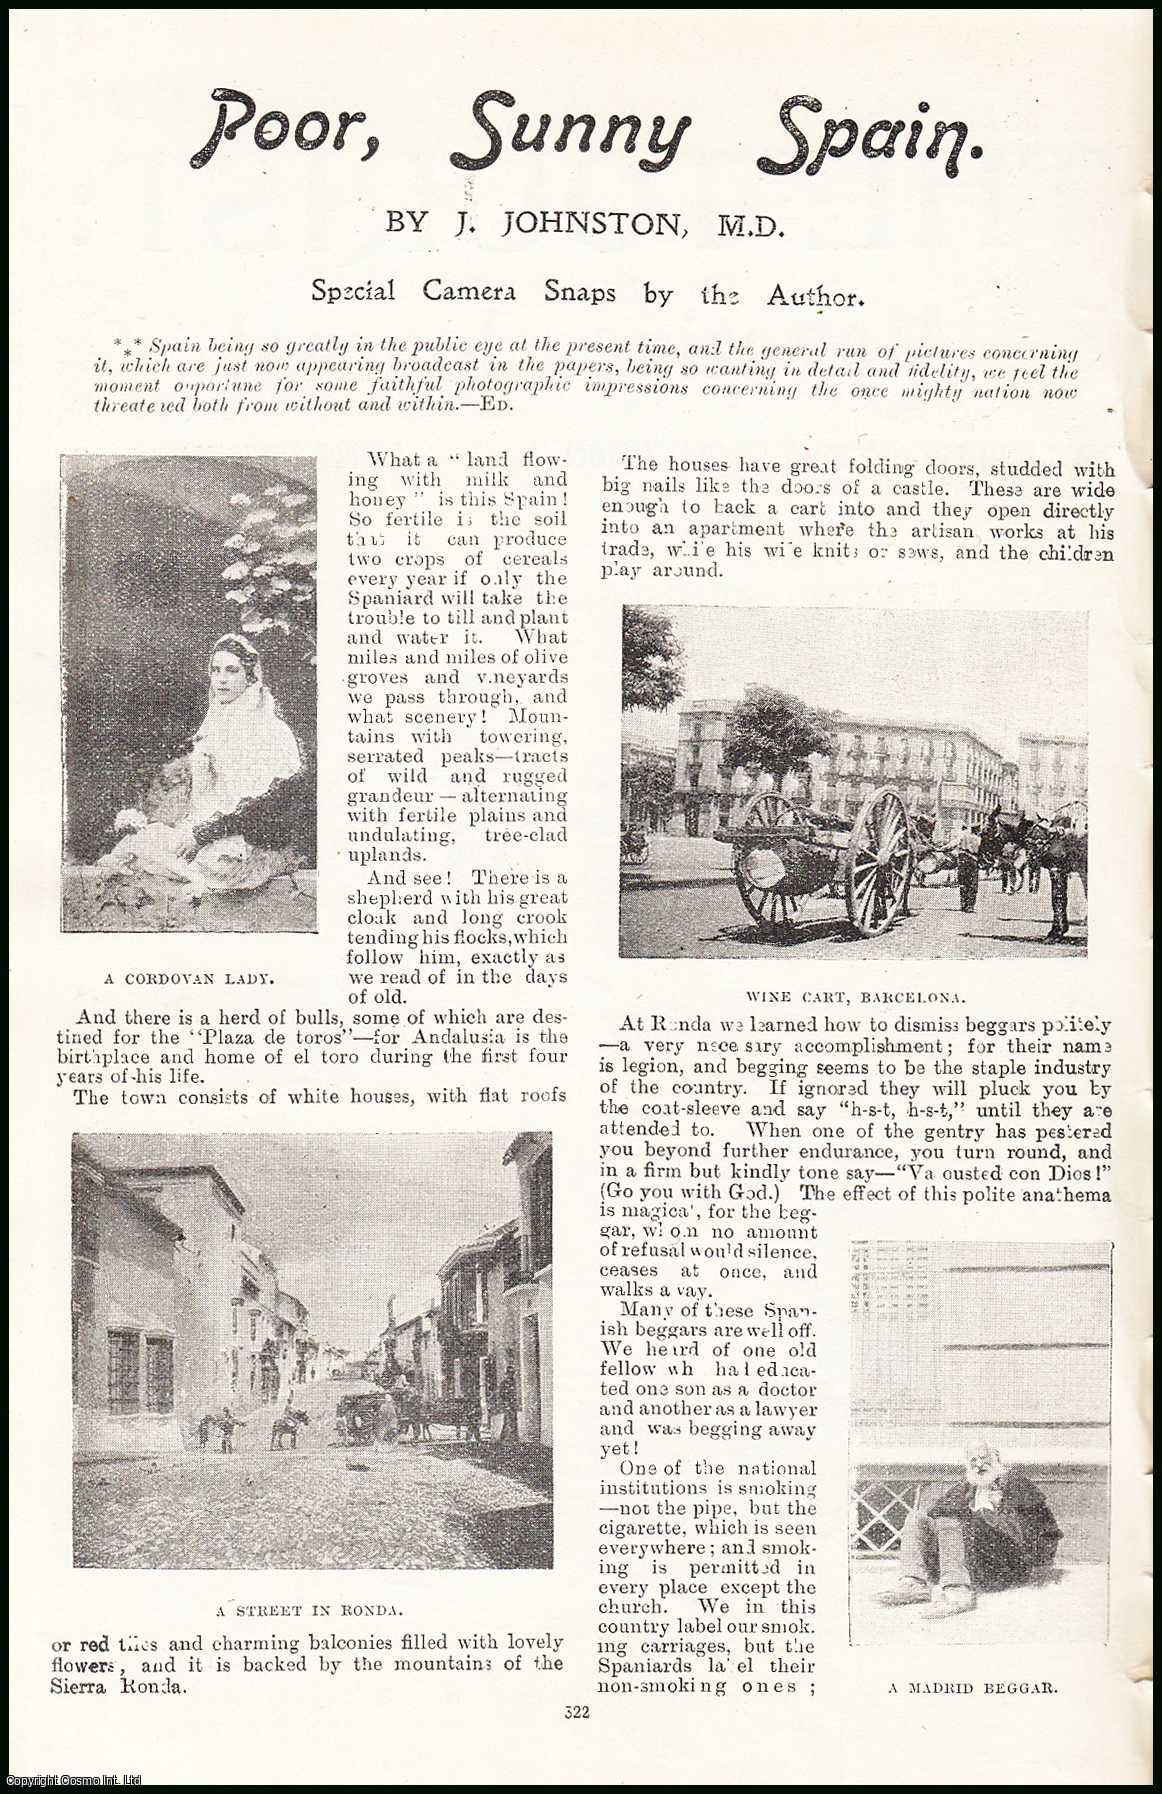 J. Johnston, M.D. - Poor, Sunny Spain, Barcelona. An uncommon original article from the Tourist Magazine, 1898.